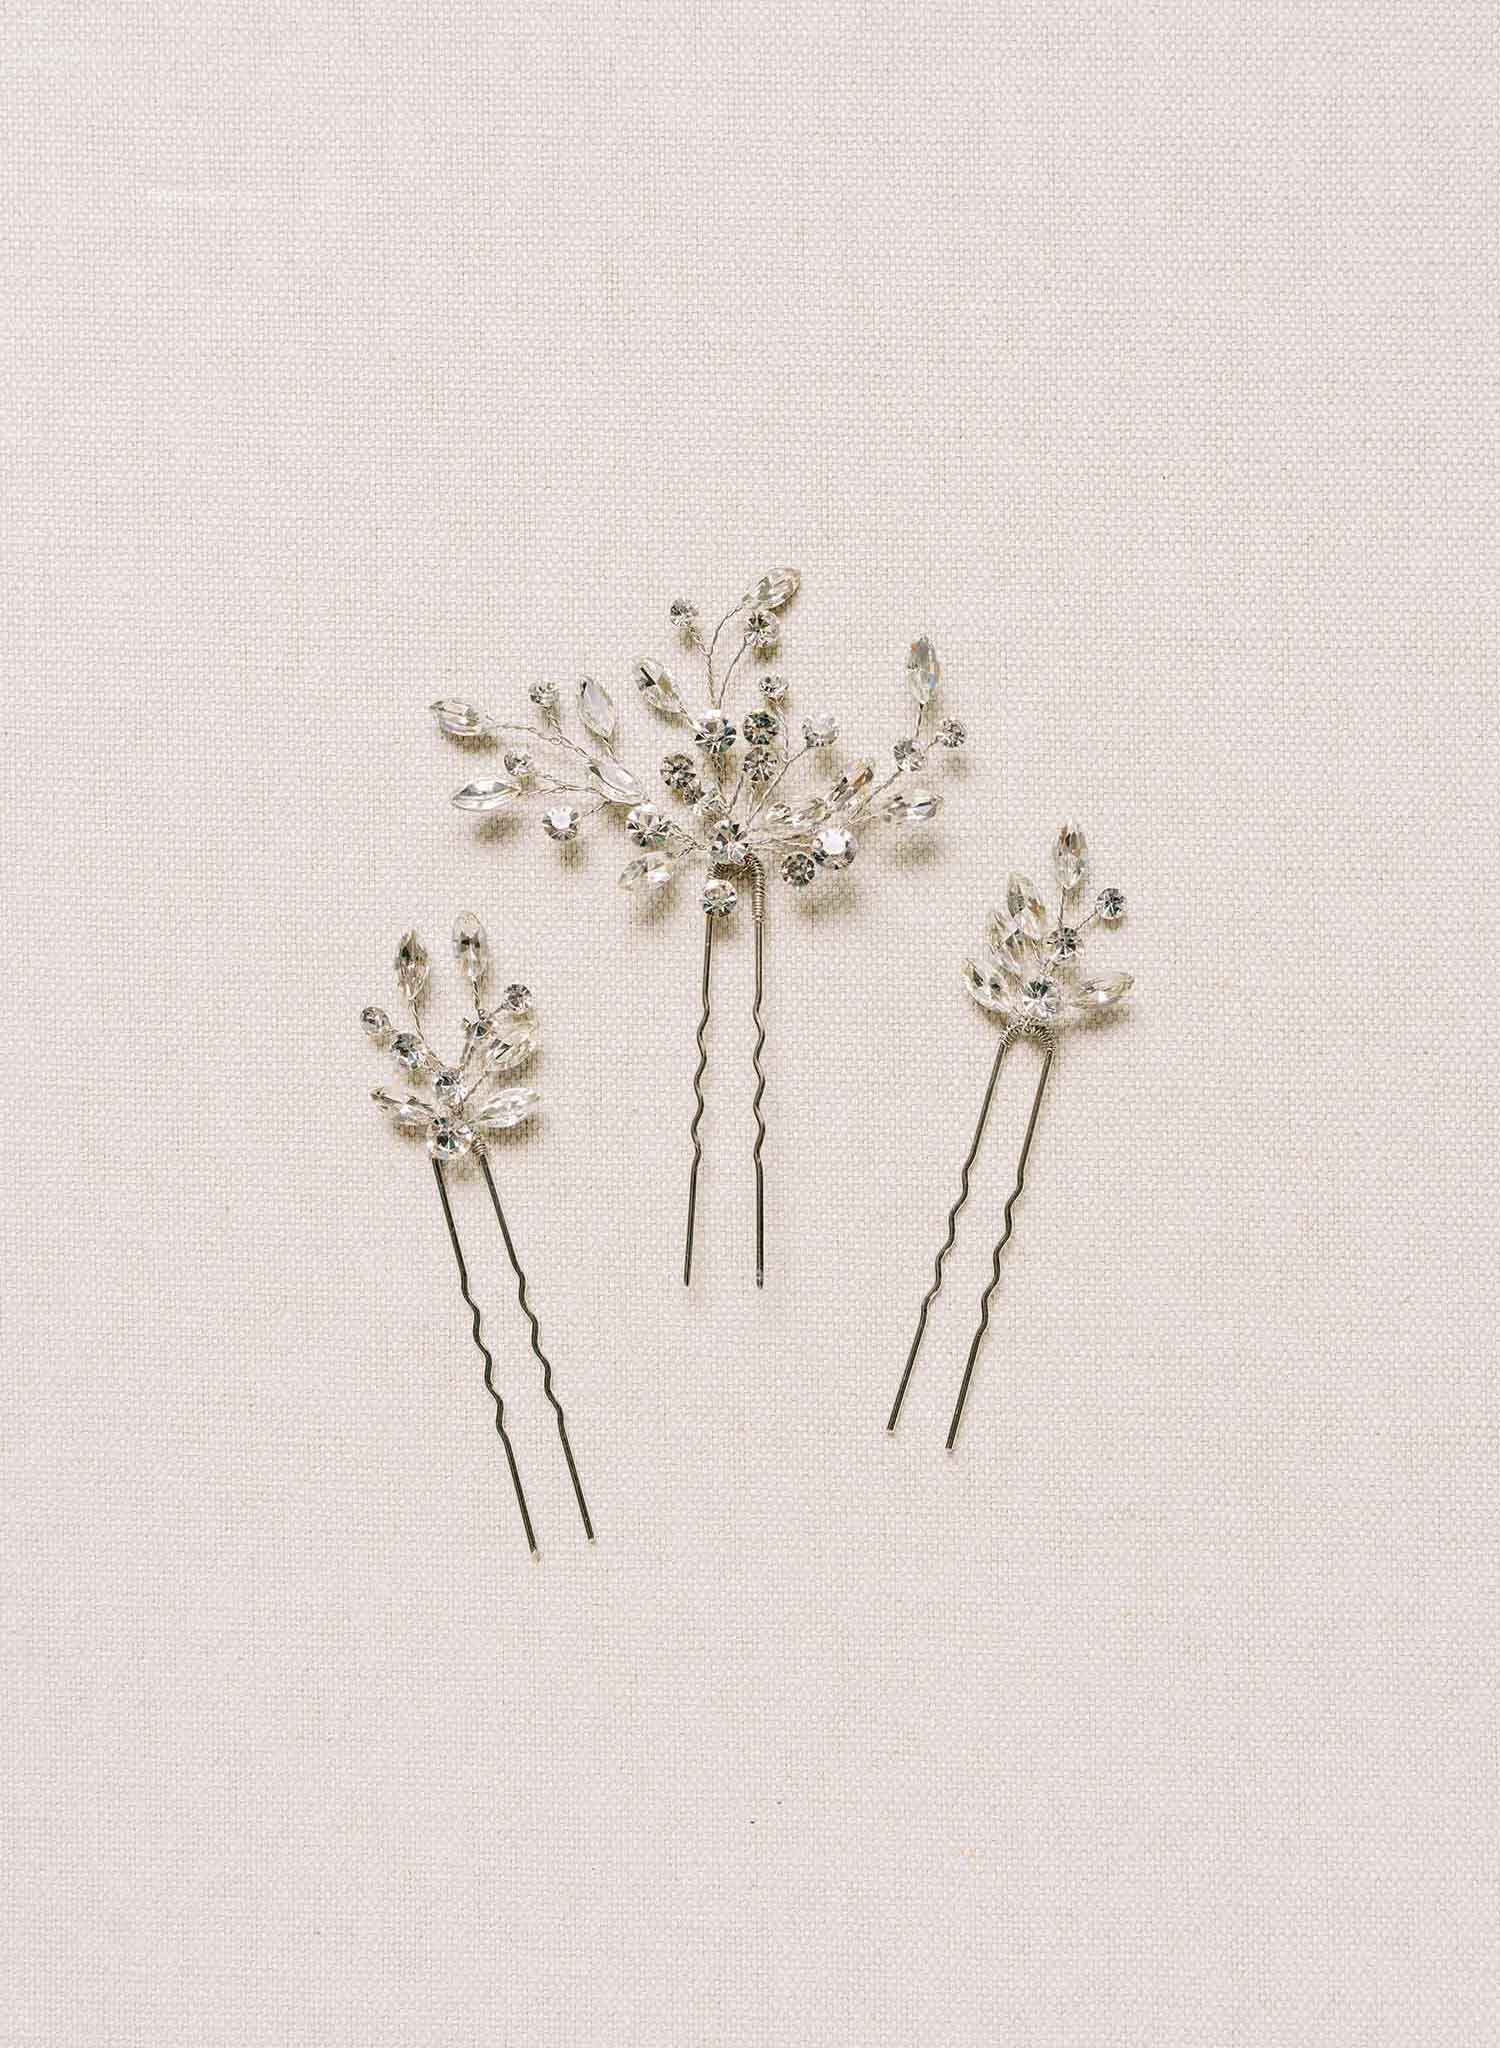 Sparkling crystal droplets hair pin set of 3 - Style #2115